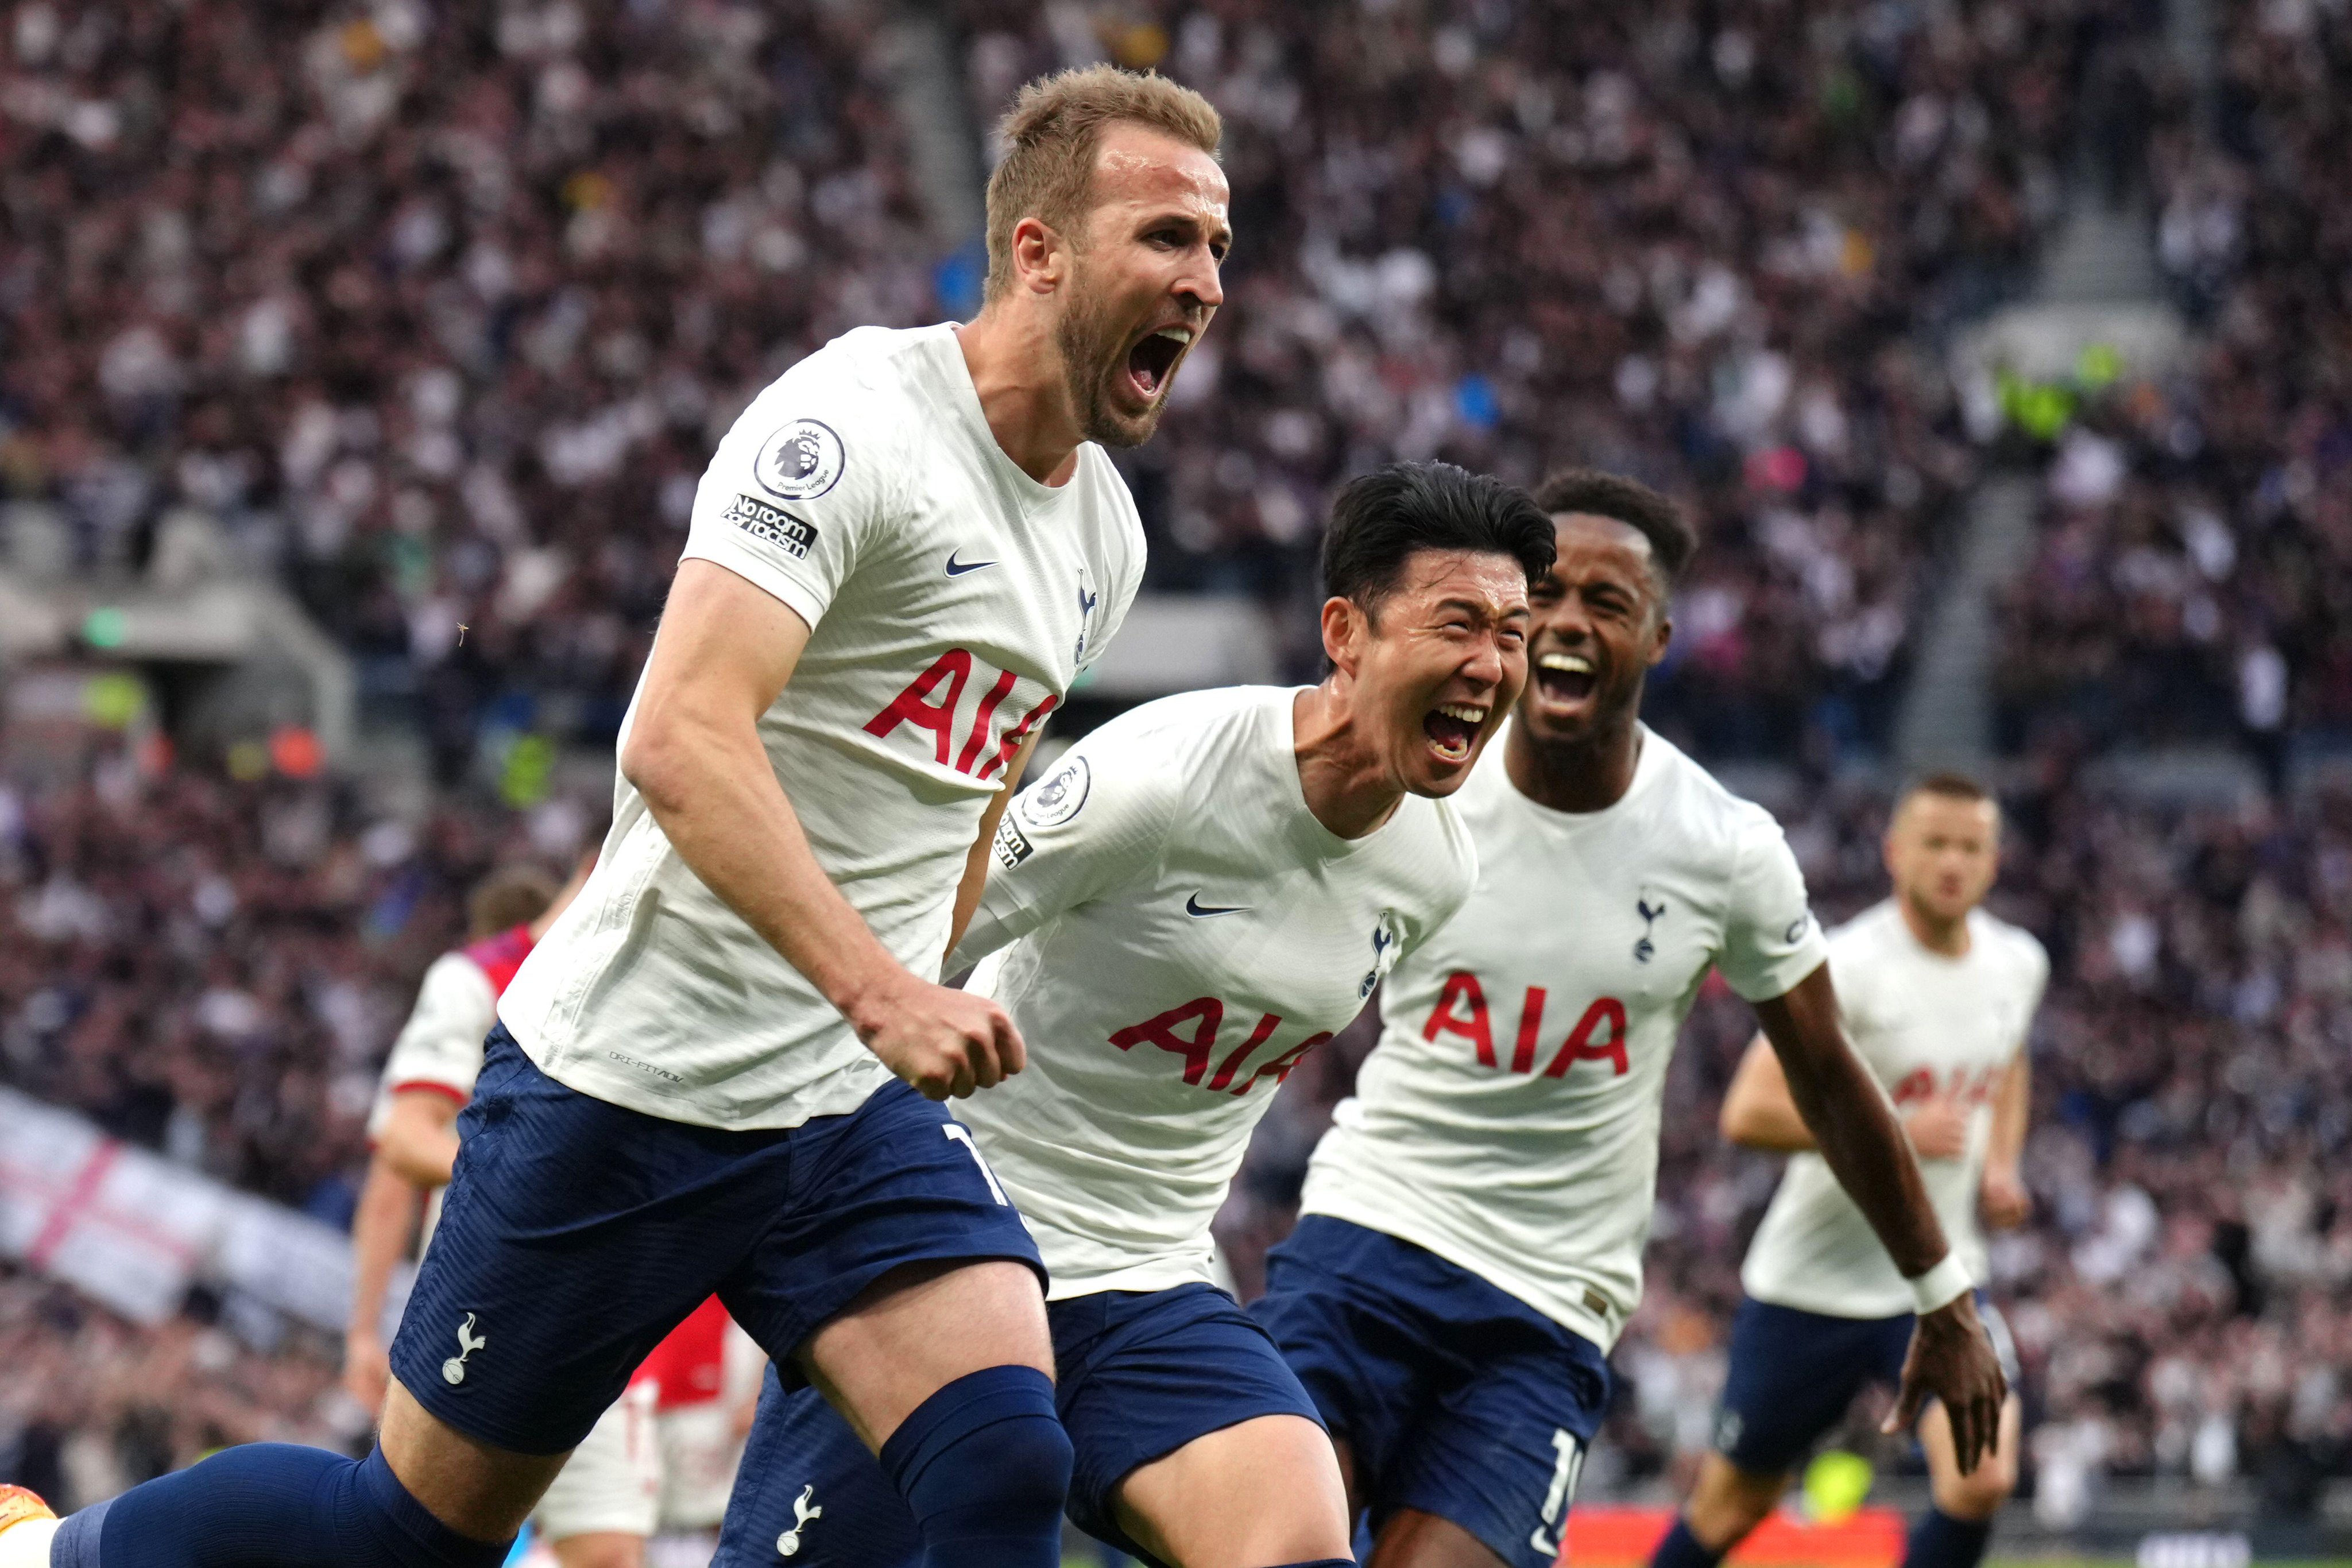 Premier League: Goals from Harry Kane and Son help Tottenham beat 10-men Arsenal, Spurs move 1 point closer to 4th place Gunners, Watch North London Derby HIGHLIGHTS